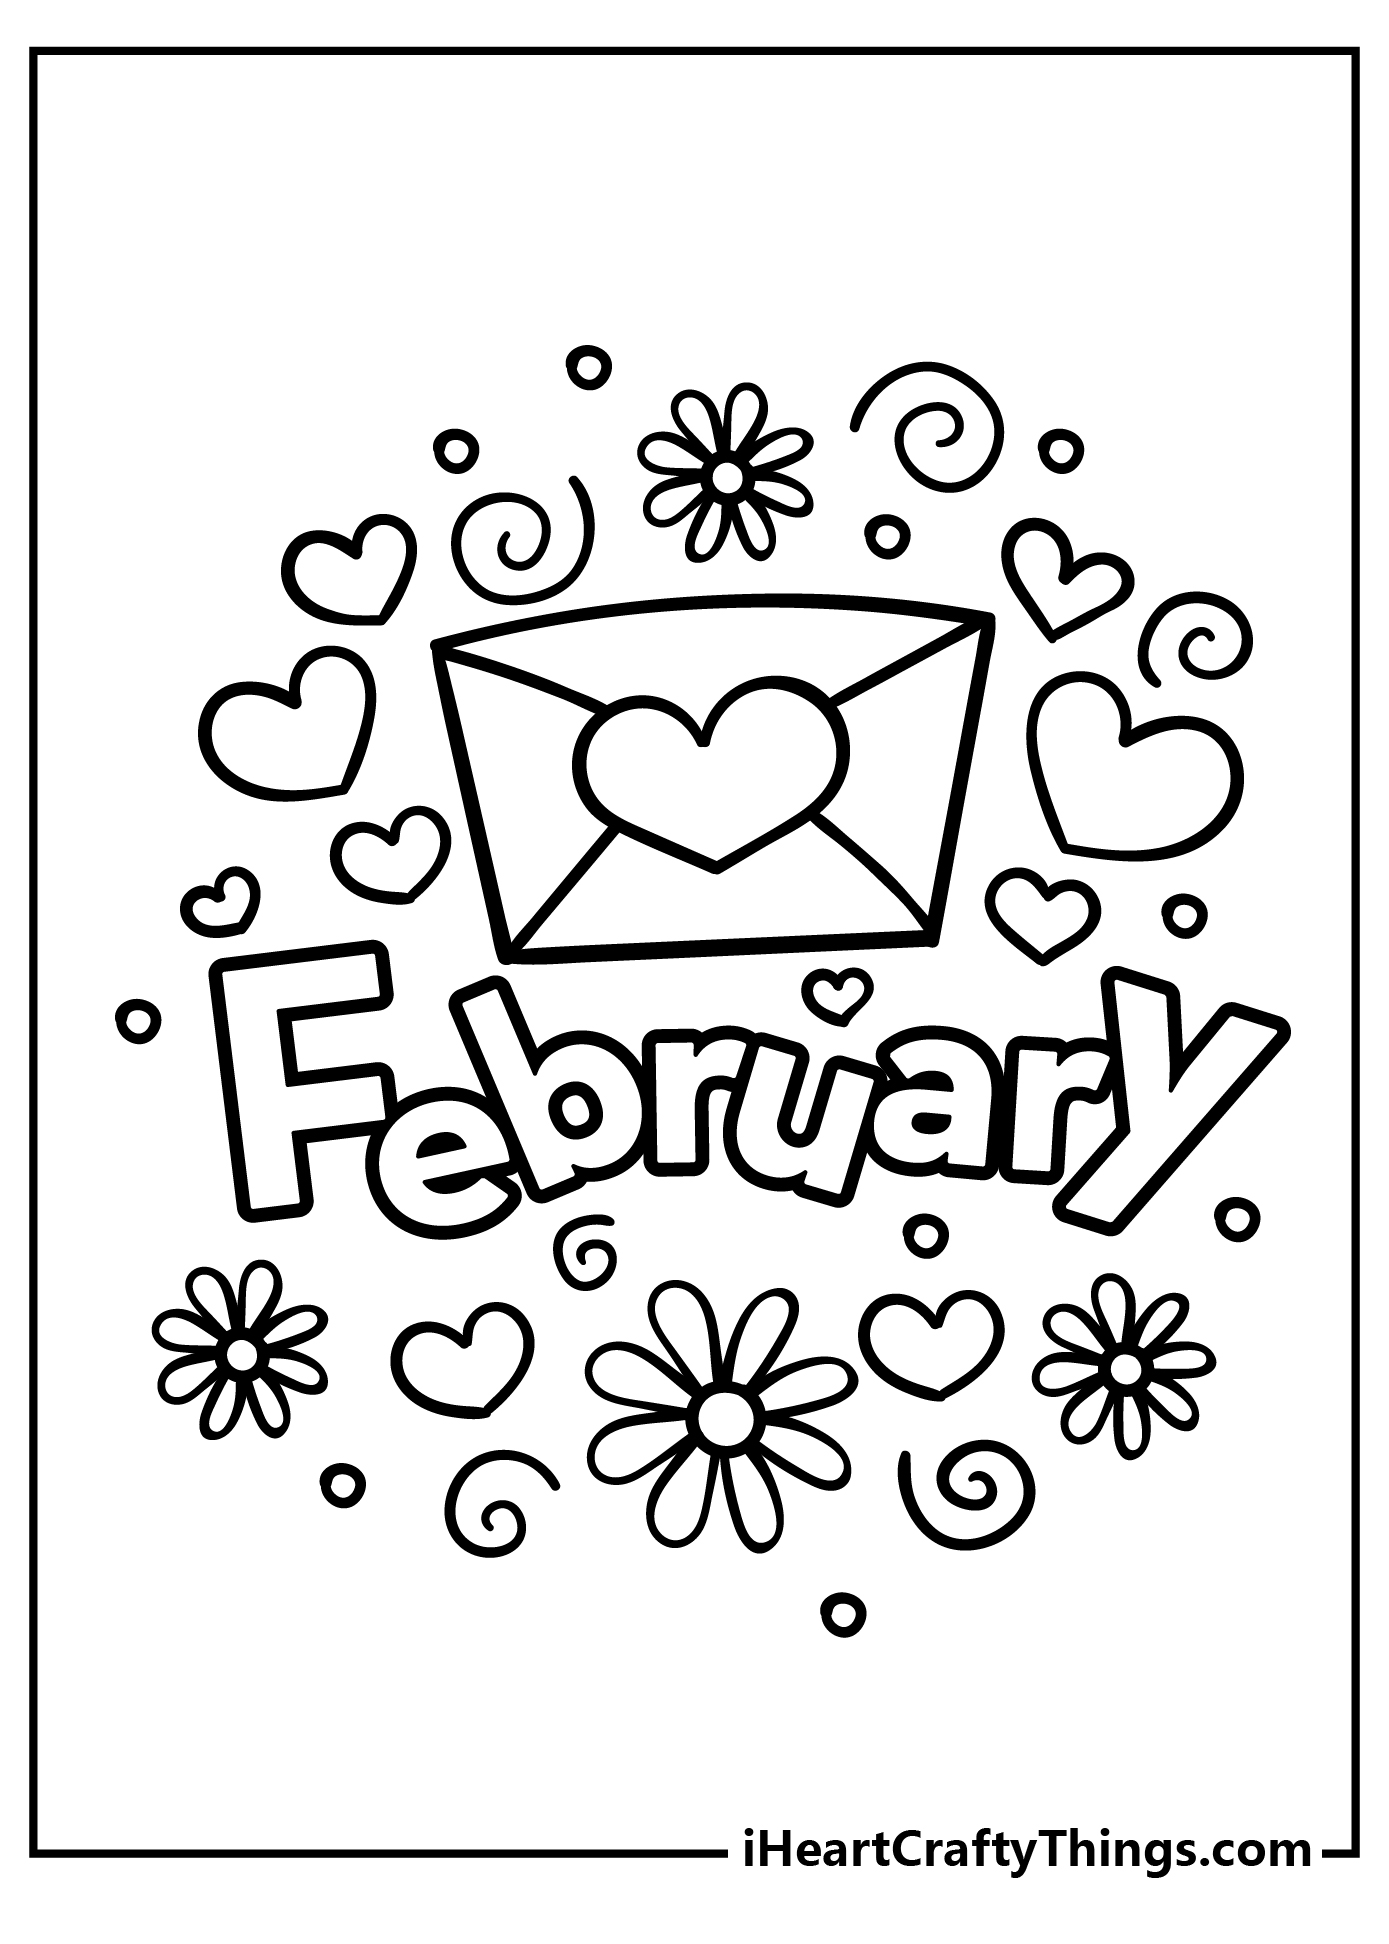 February Coloring Pages free pdf download